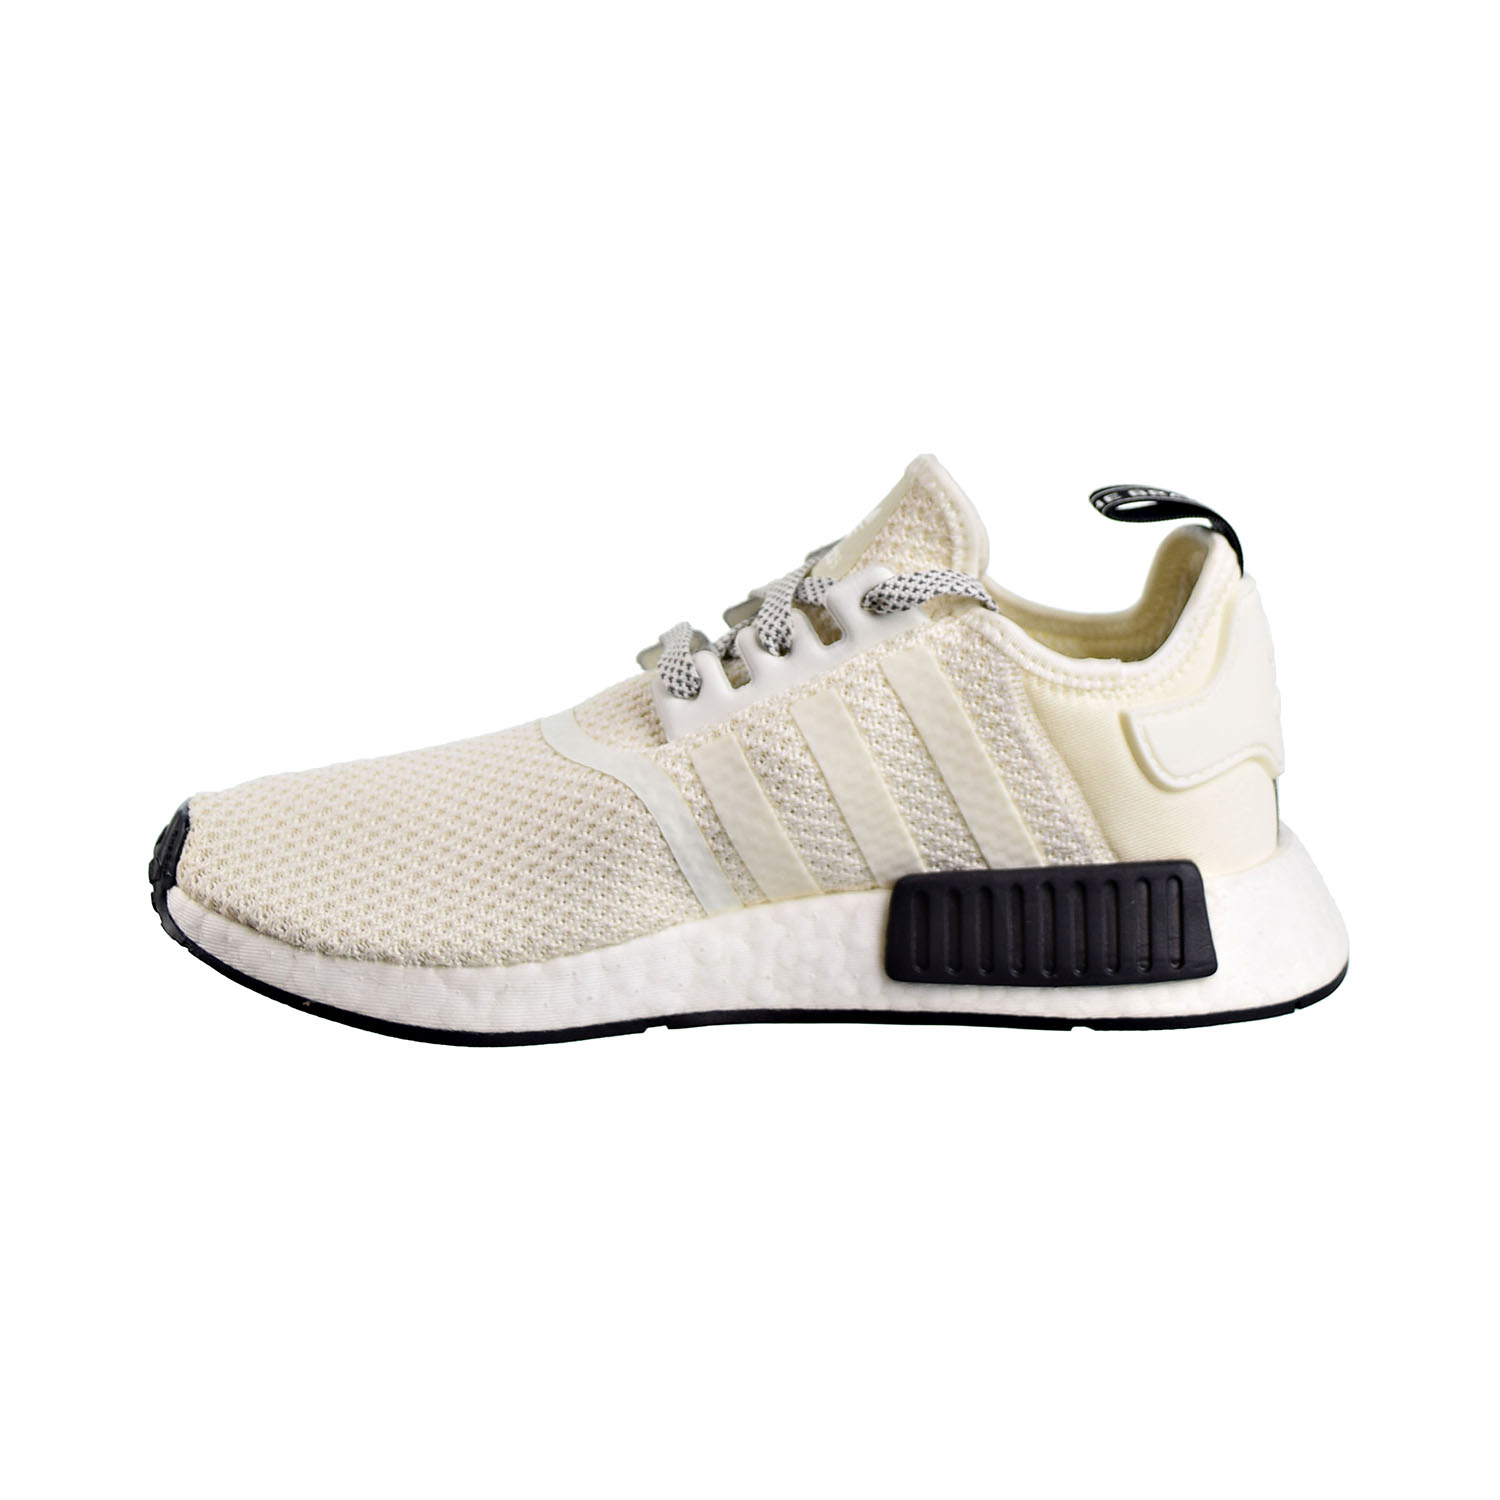 Adidas NMD_R1 Mens Shoes Off White 